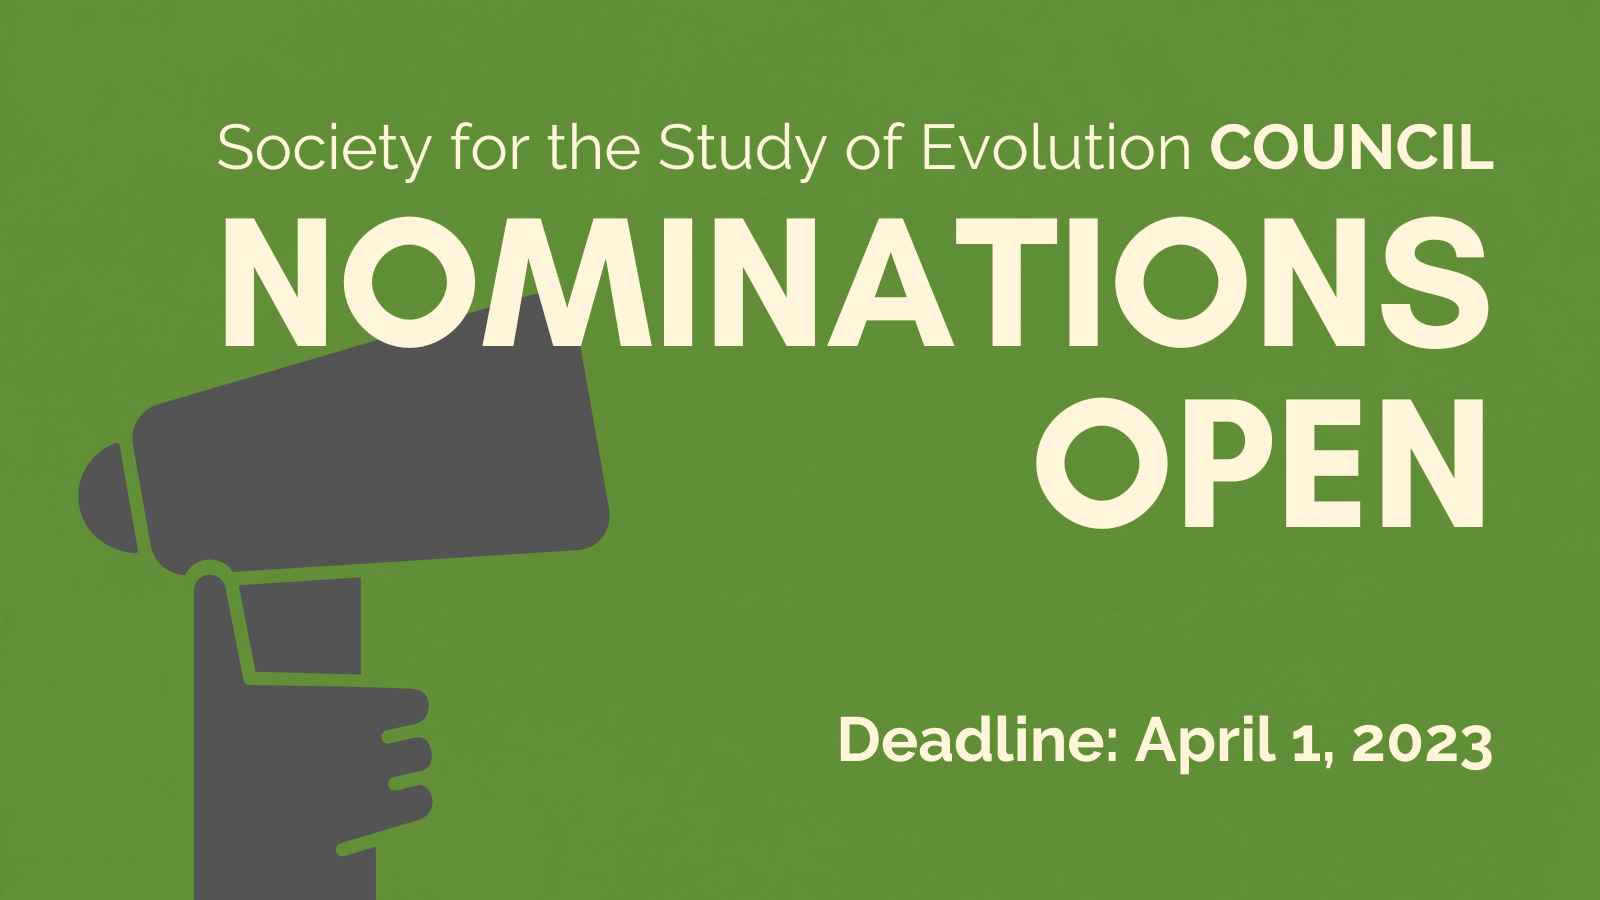 Text: Society for the Study of Evolution Council. Nominations Open. Deadline: April 1, 2023. Outline of a hand holding a megaphone.